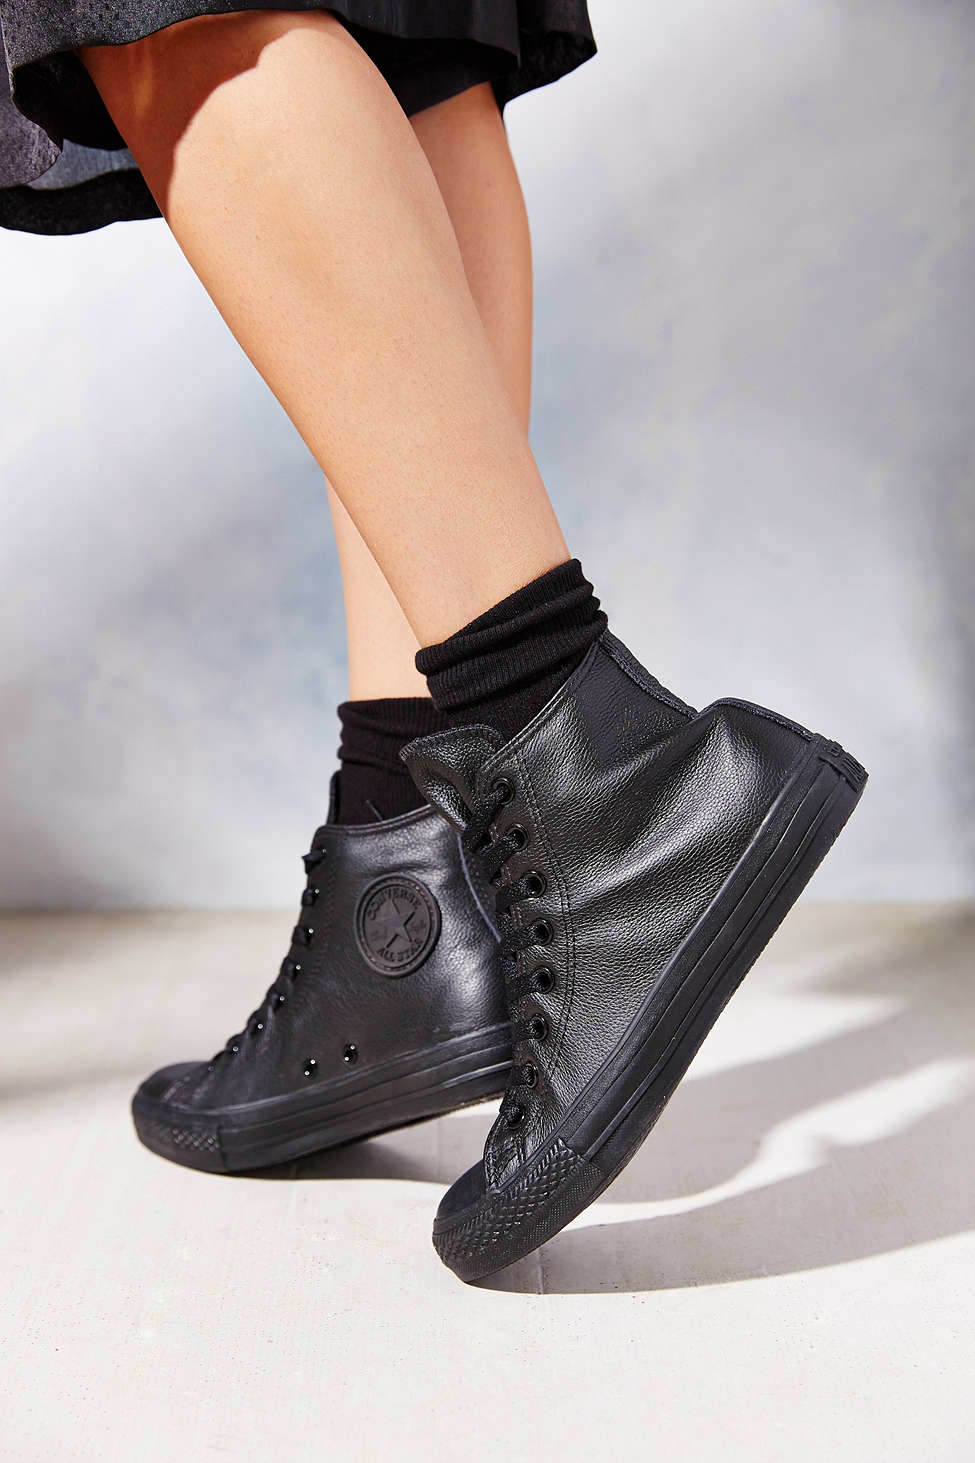 Converse Chuck Taylor All Star Leather High Top Sneaker in Black | Lyst